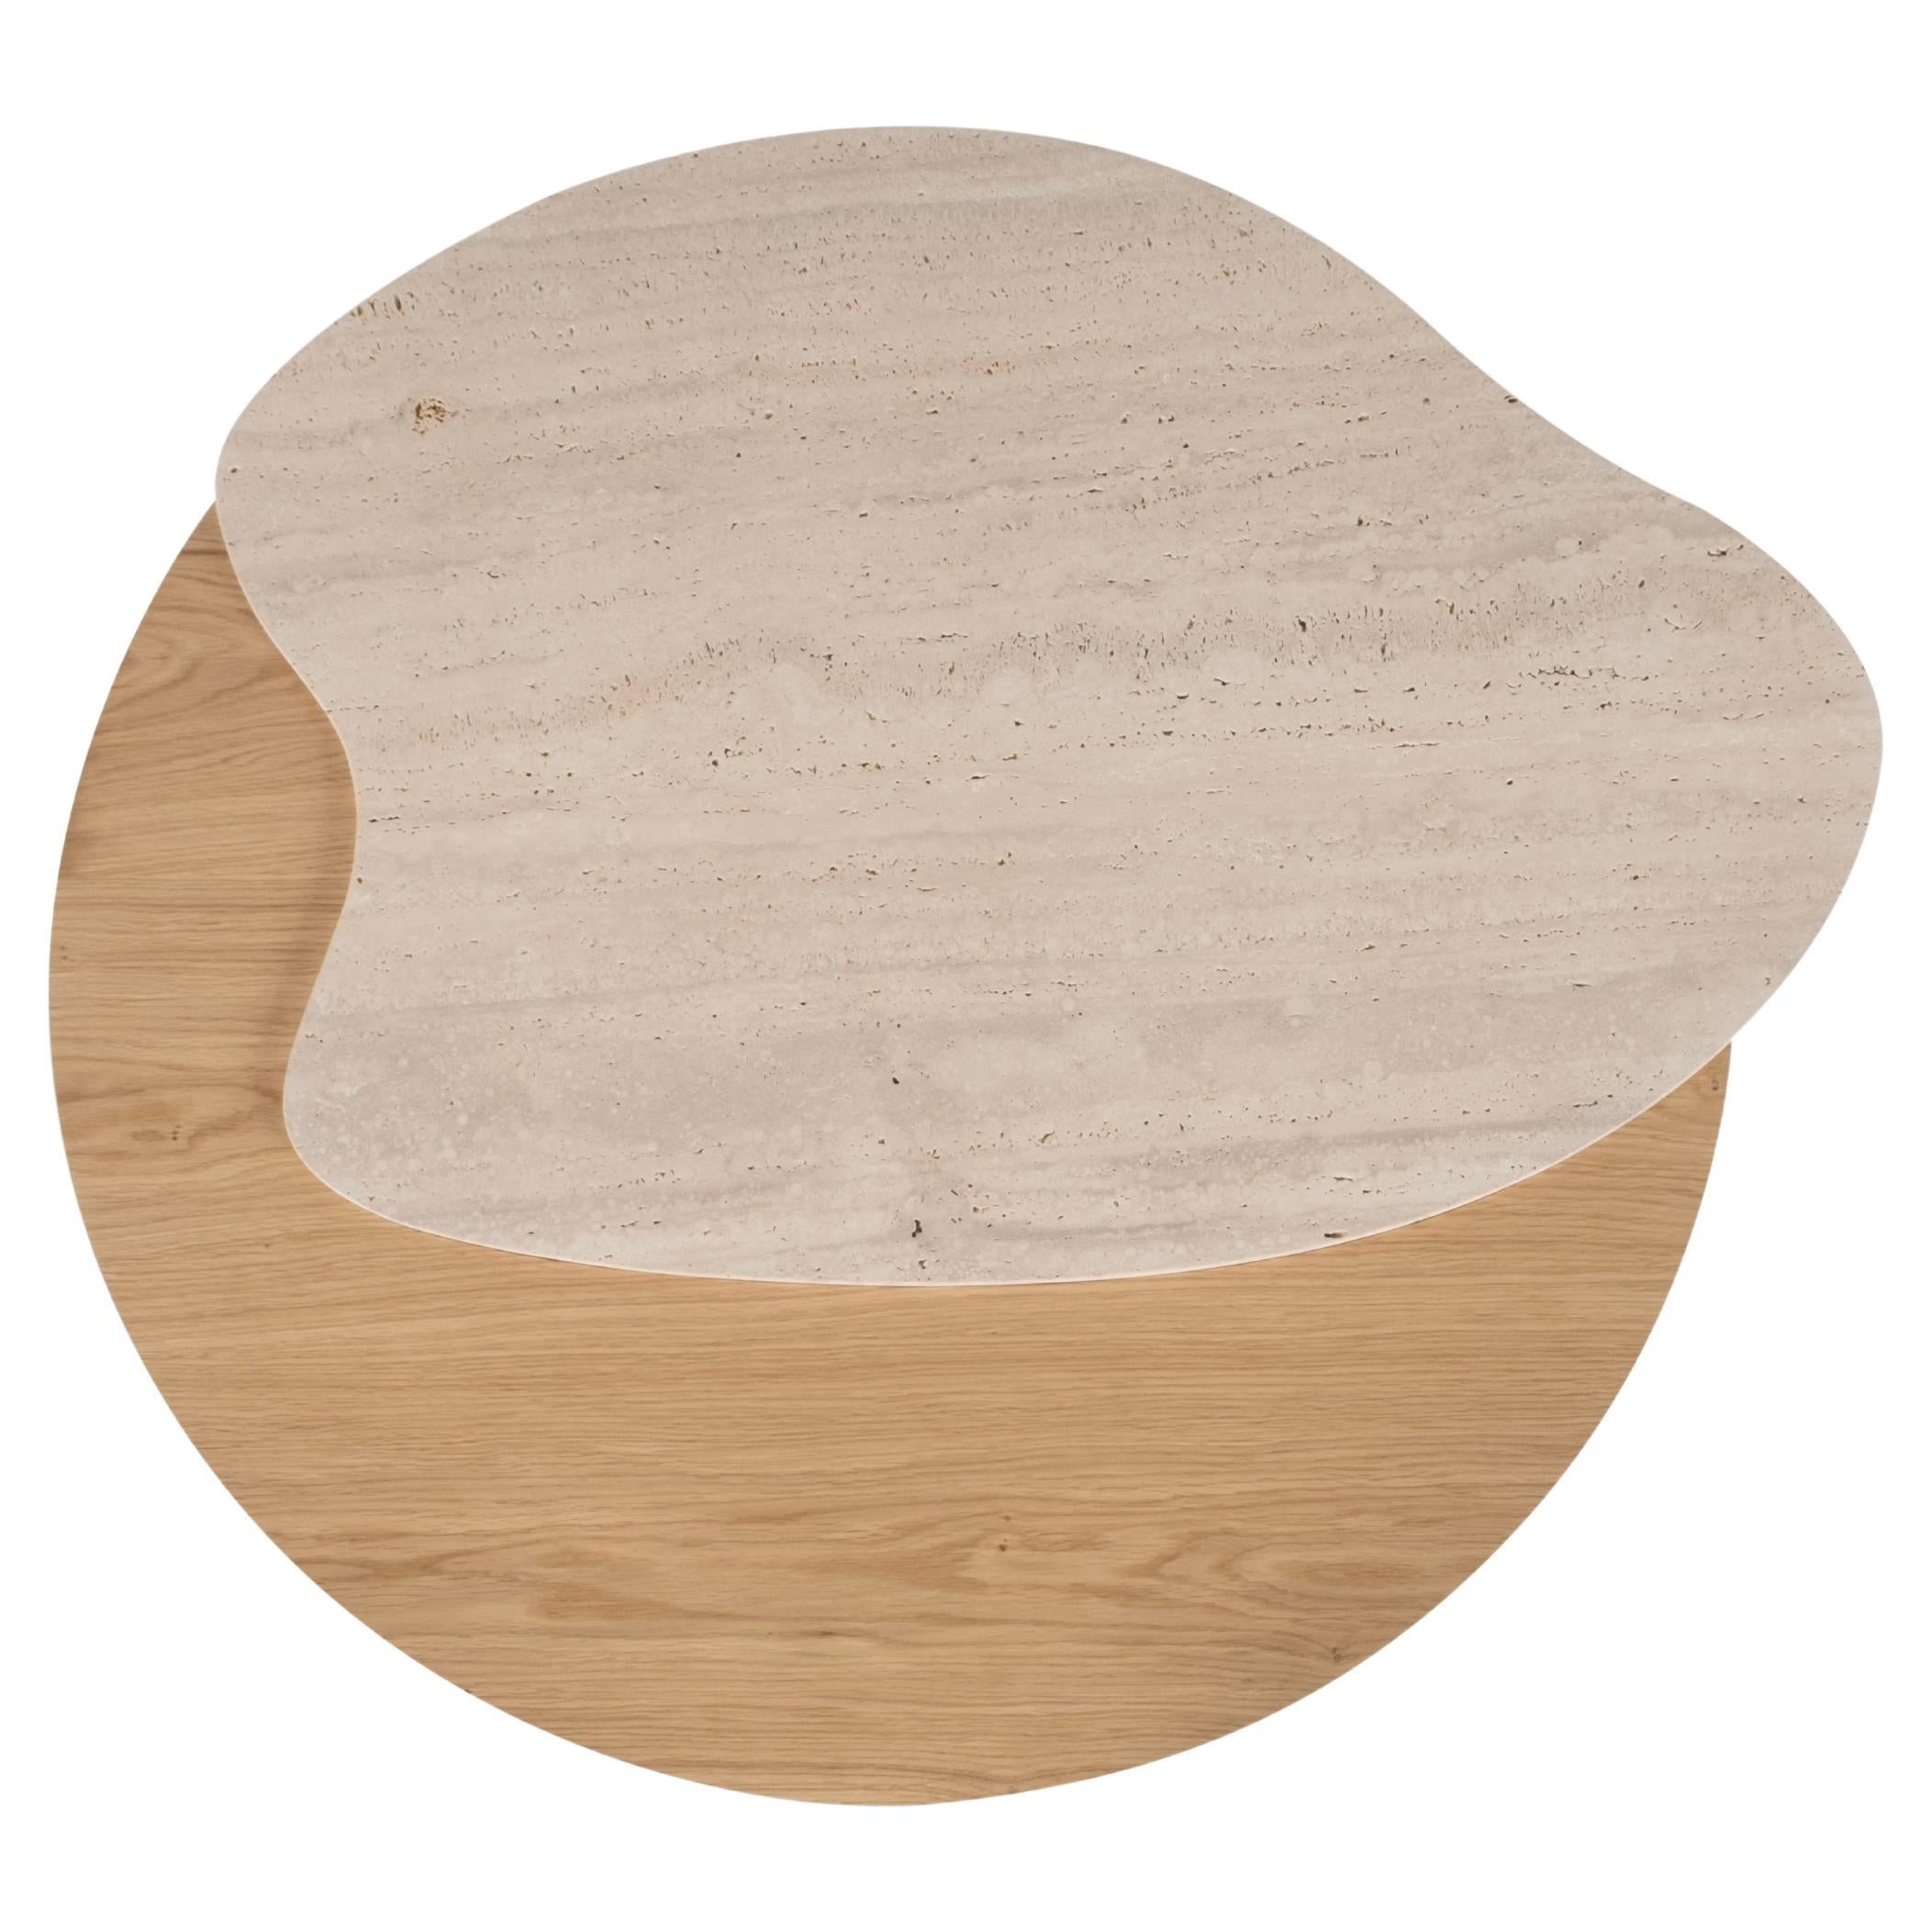 Bordeira coffee table, Contemporary Collection, handcrafted in Portugal - Europe by Greenapple.

Designed by Rute Martins for the Contemporary Collection and inspired by the lines of the beautiful Bordeira beach, this low table adds a